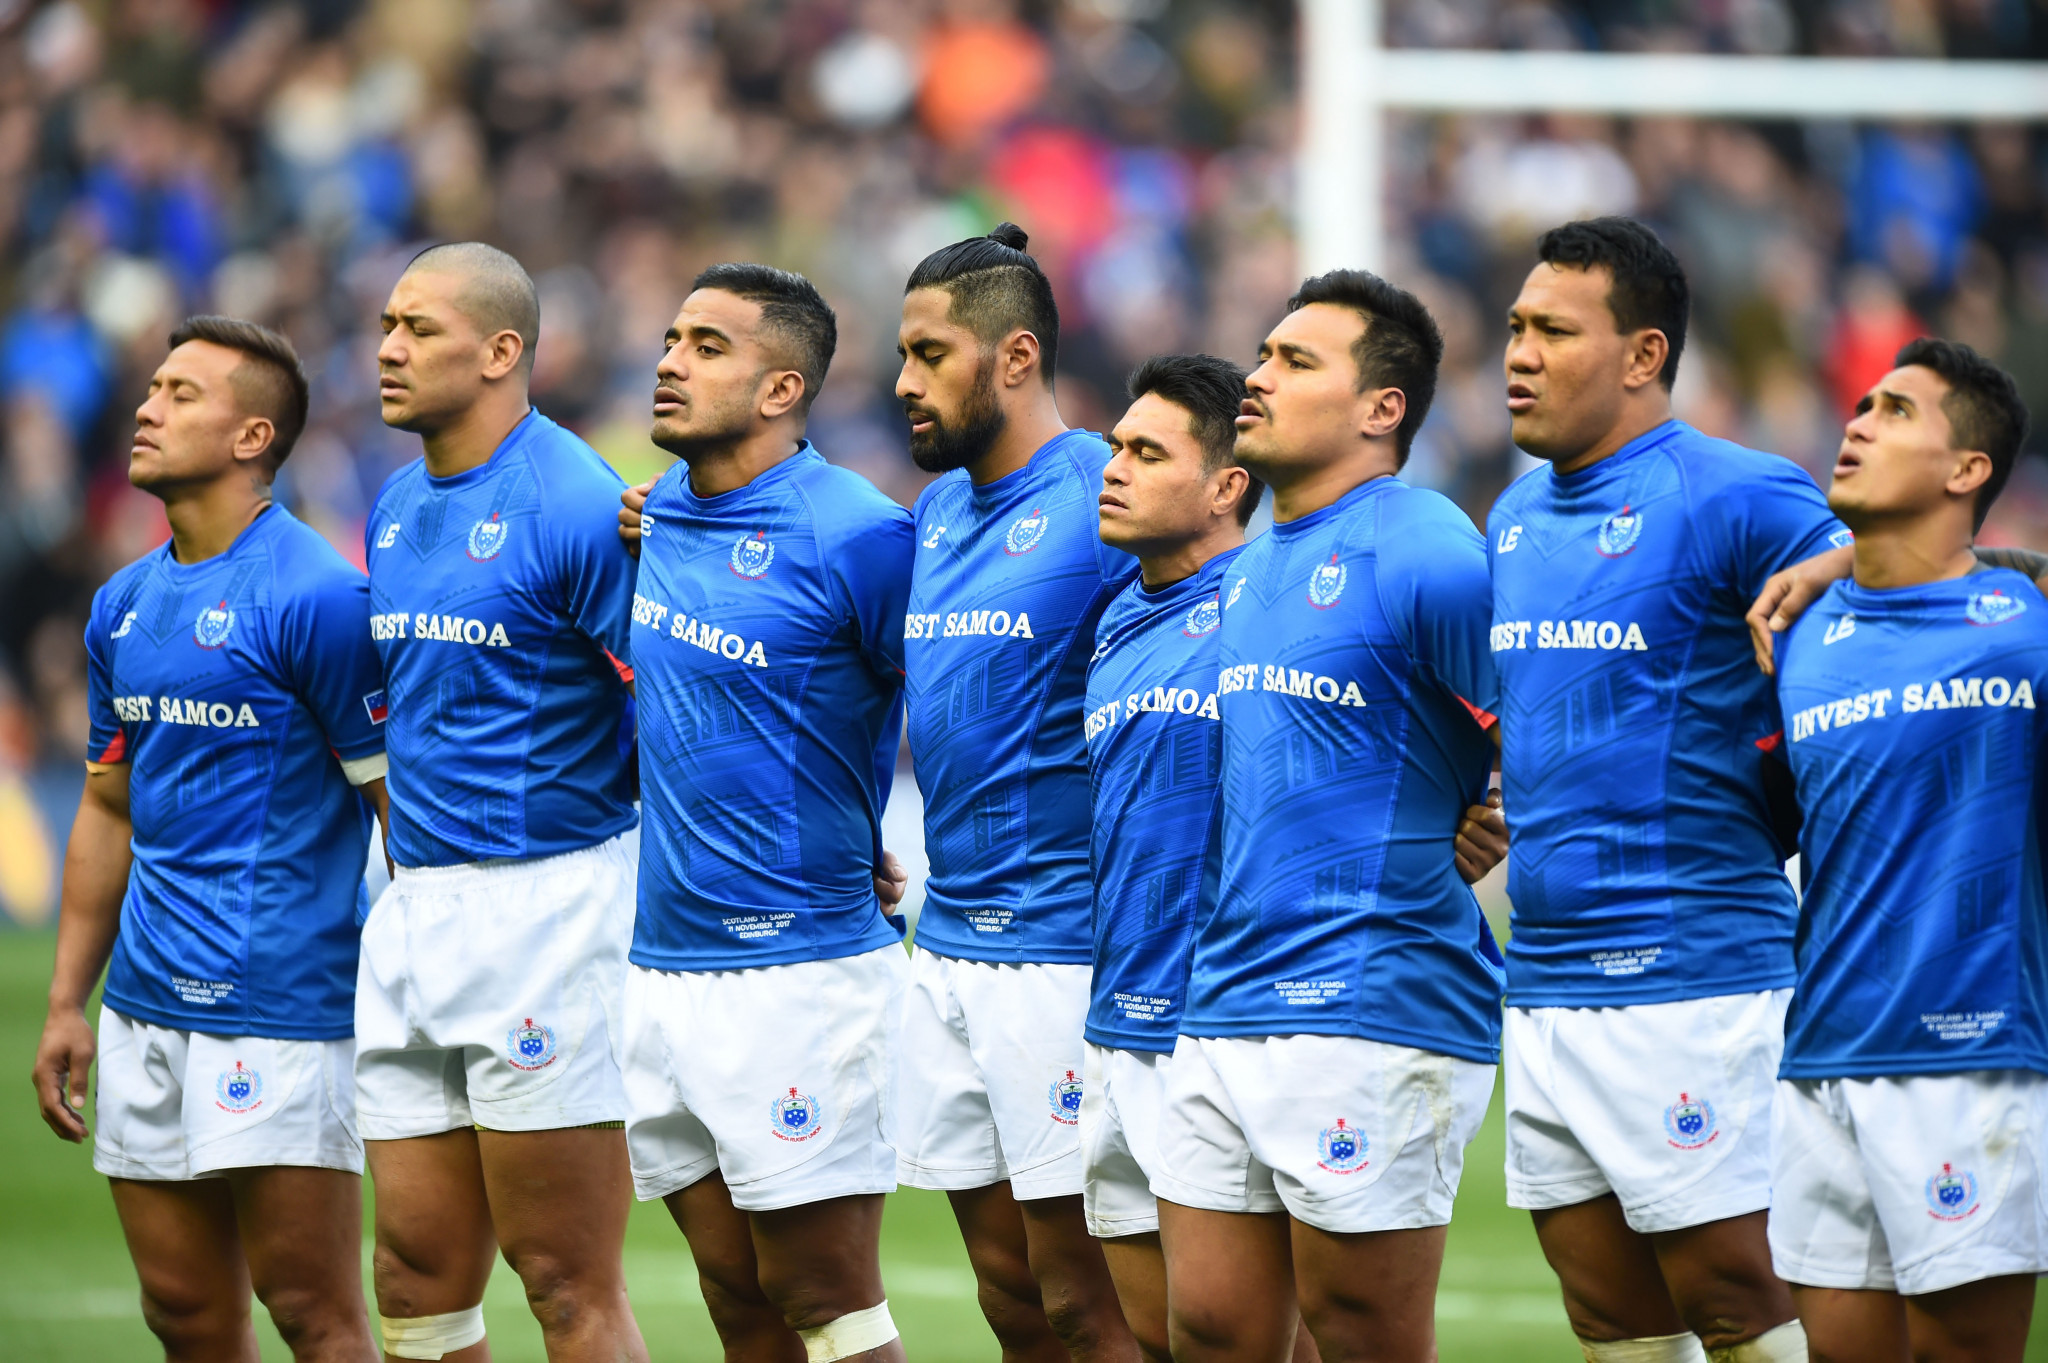 Samoan players sing the national anthem before the autumn international rugby union test match in Scotland at Murrayfield Stadium in Edinburgh ©Getty Images